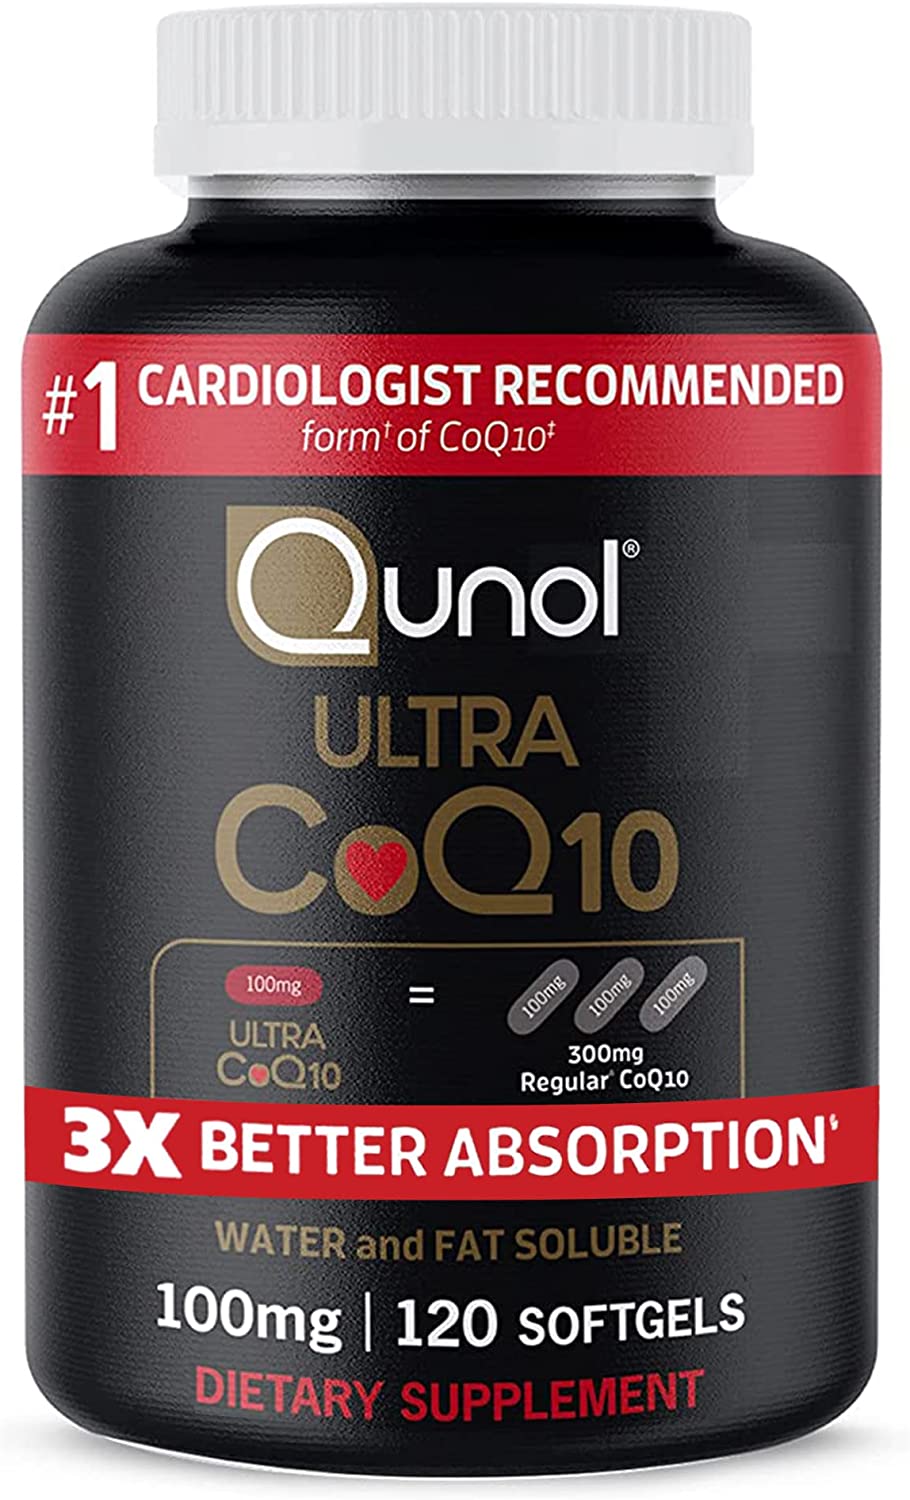 120-Count Qunol 100mg Ultra CoQ10 Antioxidant Supplement Softgels $18 w/ S&S + Free Shipping